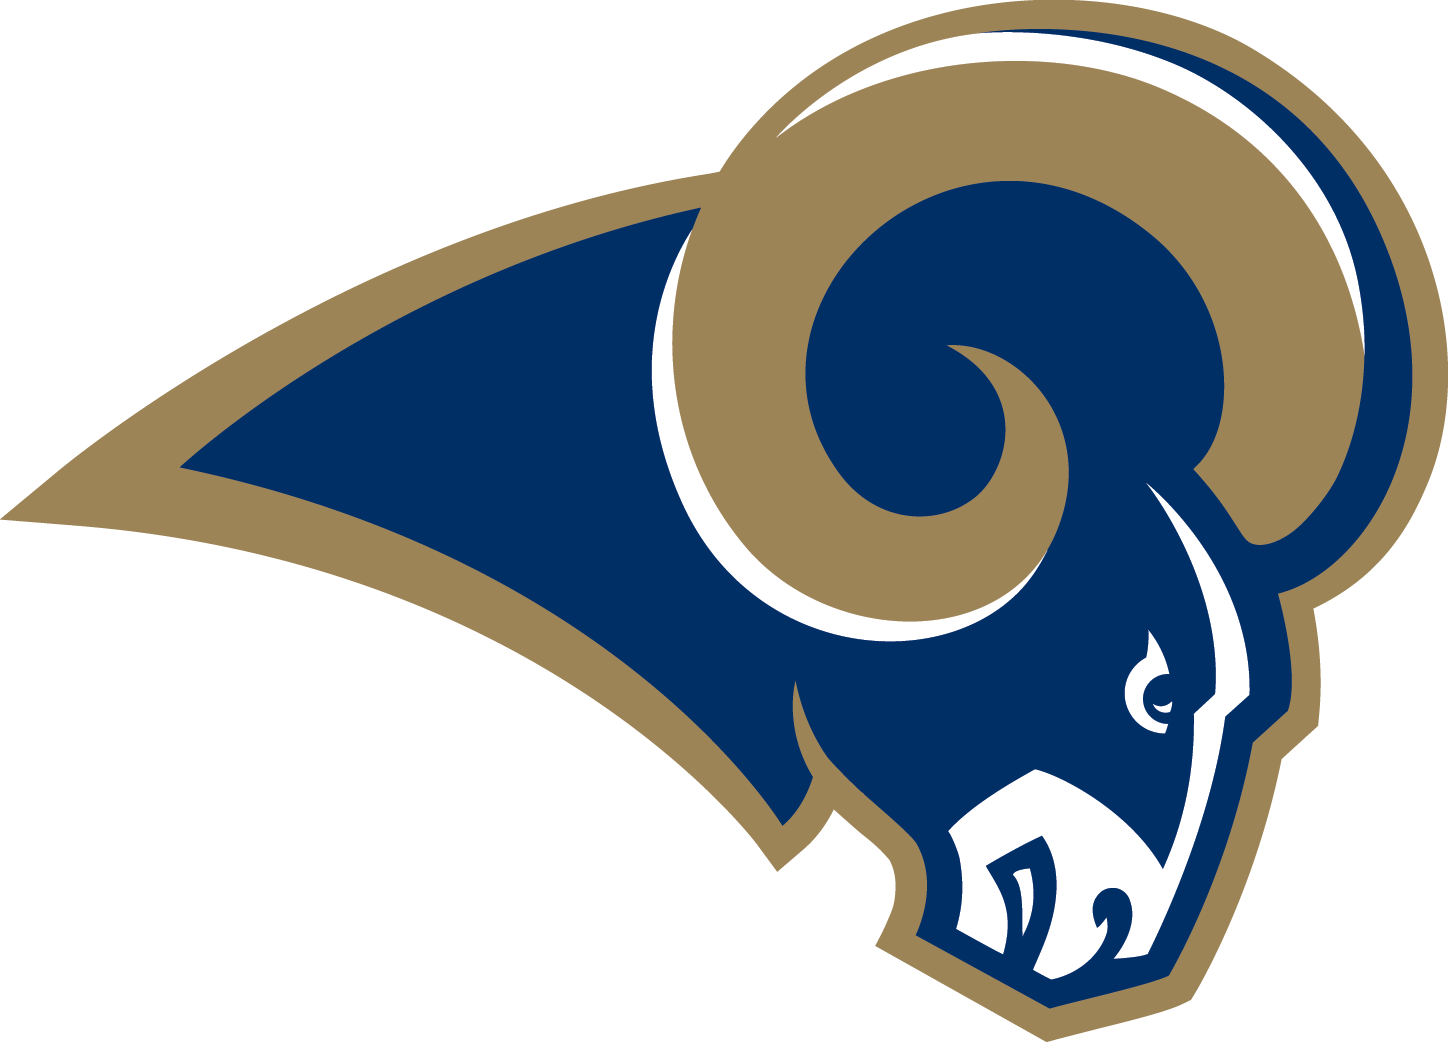 City of Champions Stadium: Home to L.A. Rams In 2019 - Gentlemens Guide LA